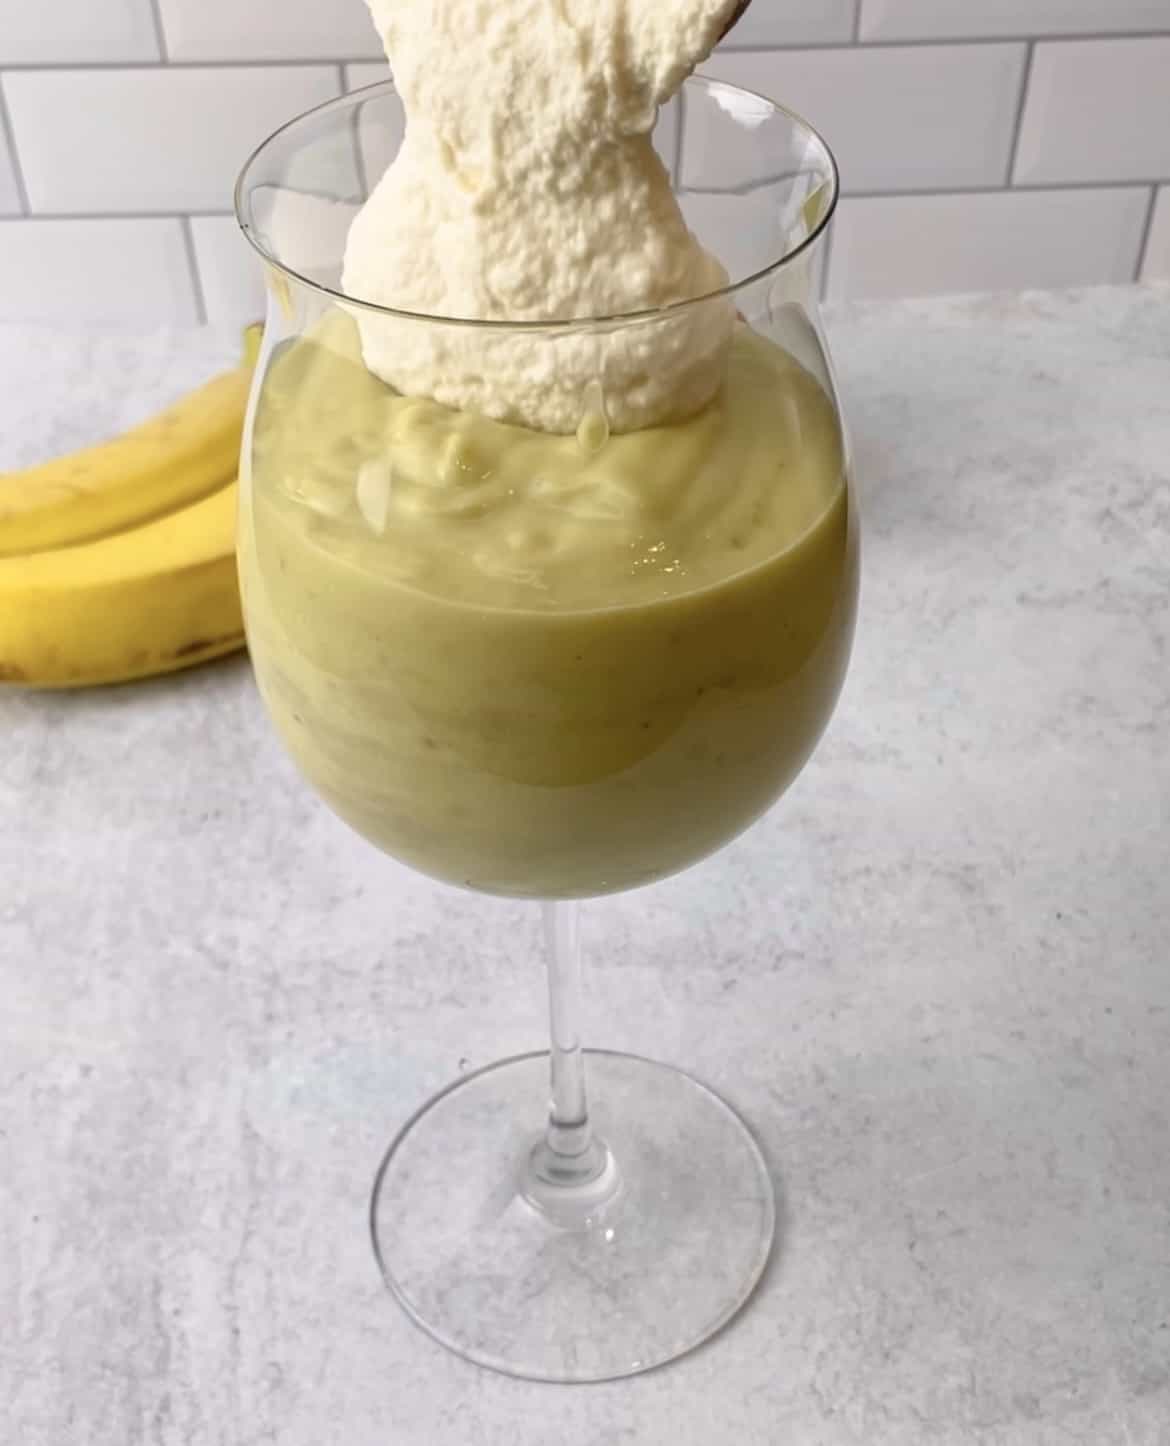 Mashed avocados with honey and milk are placed in a glass with some whipped cheese is drizzled over them.